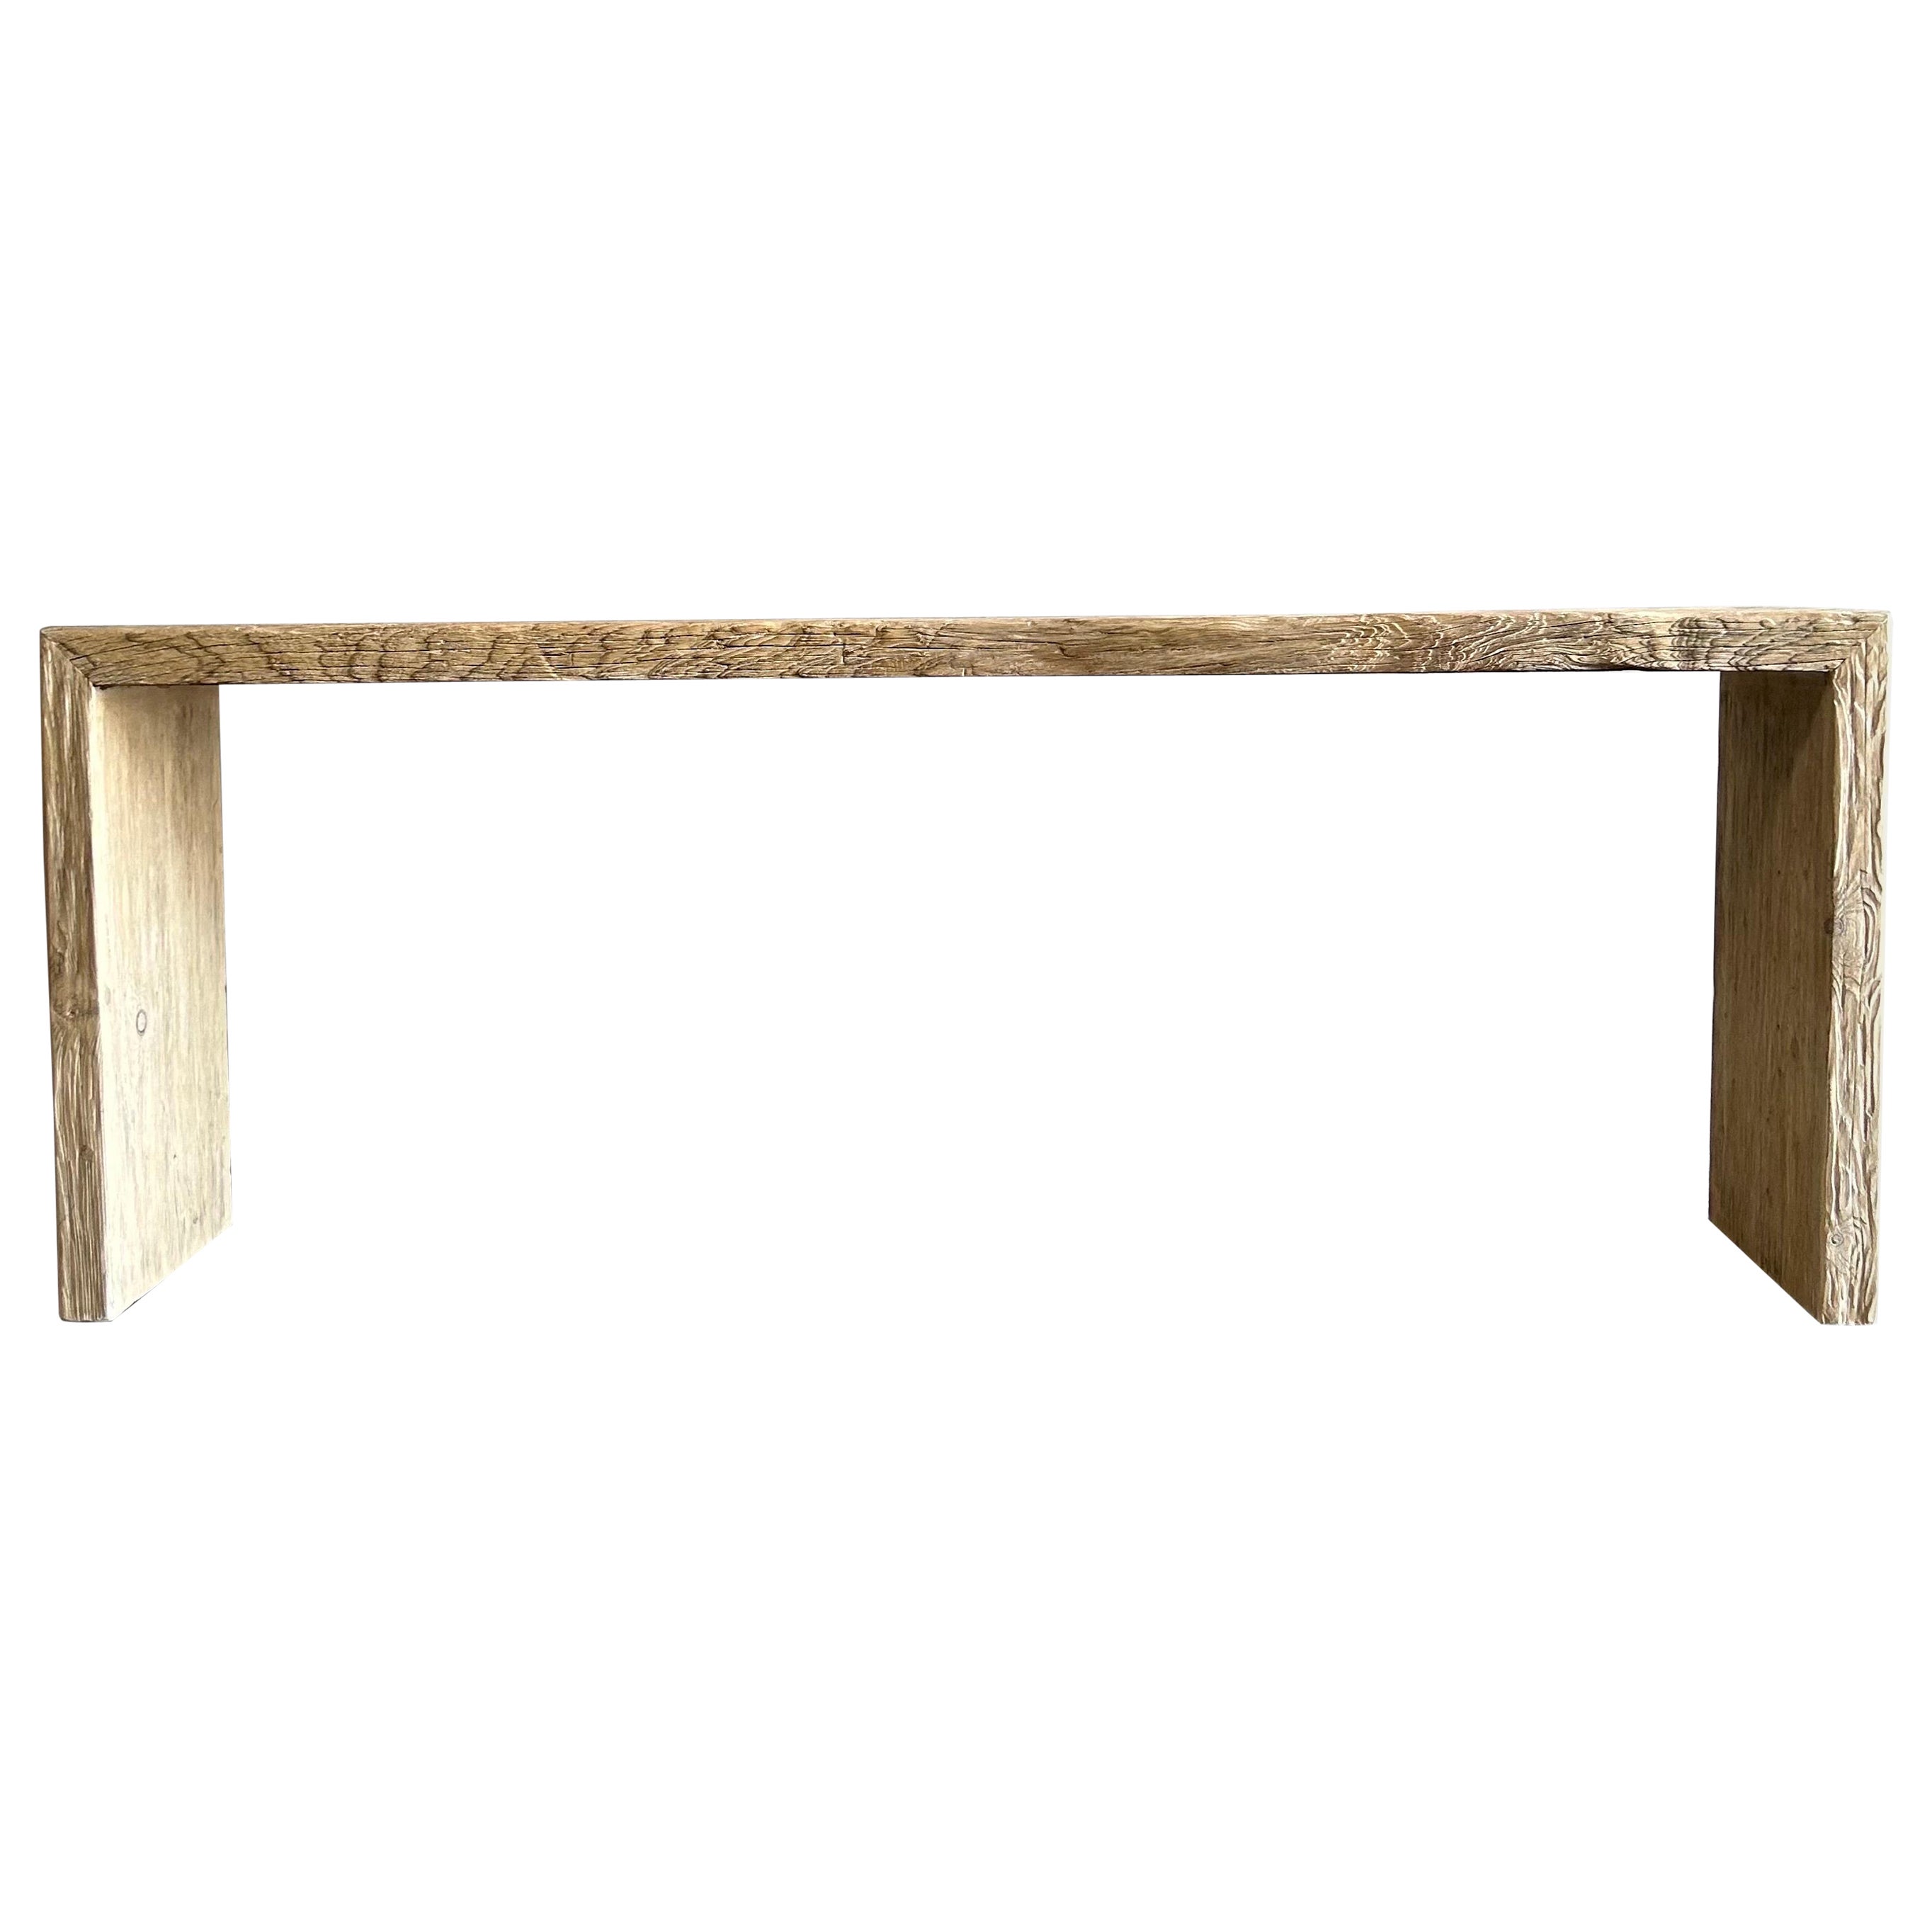 Natural Elm Wood Reclaimed Waterfall Style Console Table 